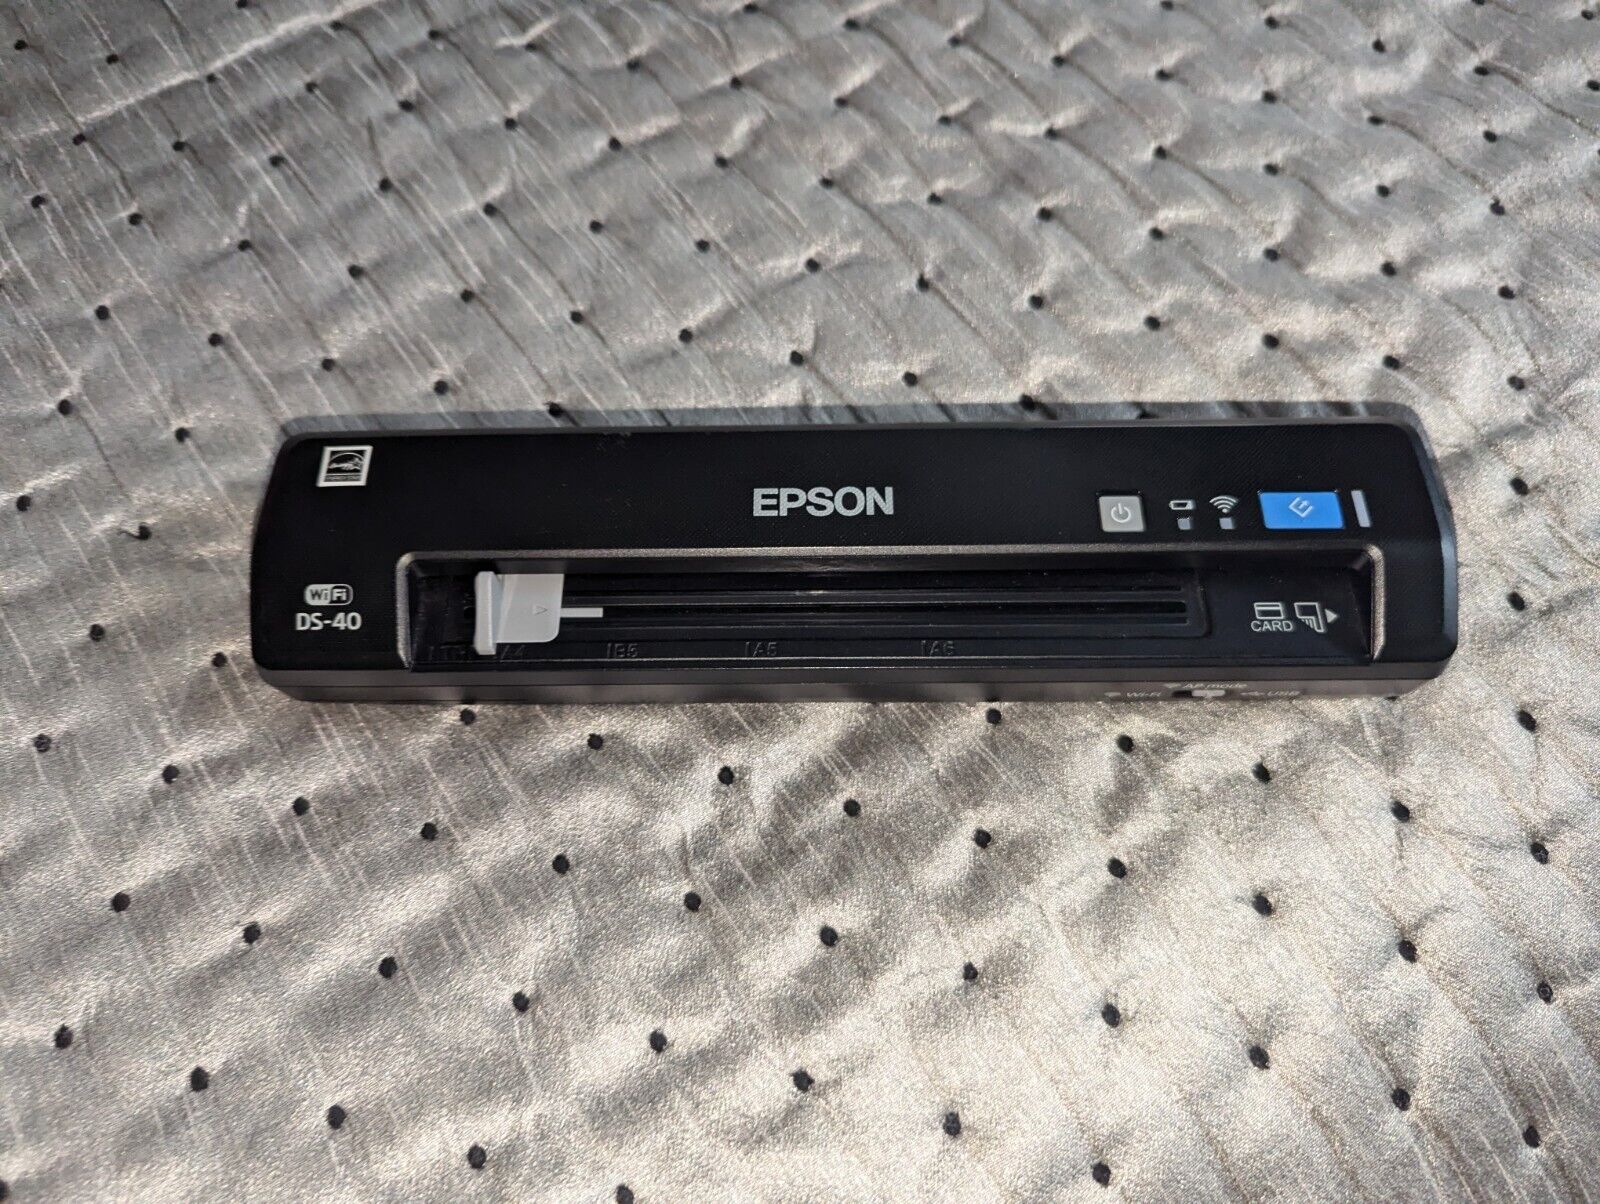 Epson WorkForce DS-40 Wireless Portable Color Document Scanner No Cables Uses AA